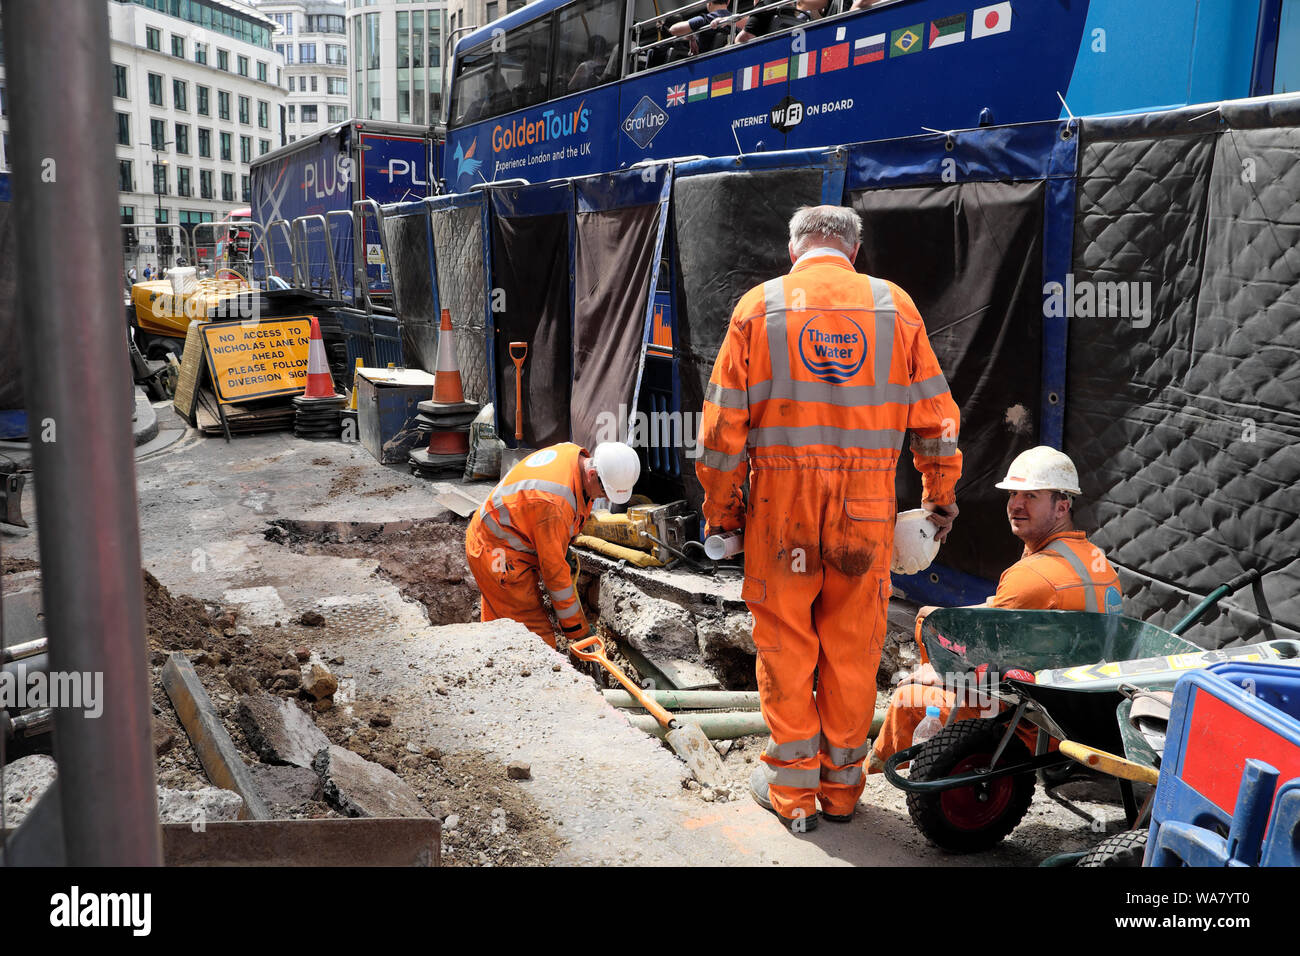 Thames Water worker and workmen digging up the road and buses on King William Street in the summer of 2019 City of London England UK  KATHY DEWITT Stock Photo